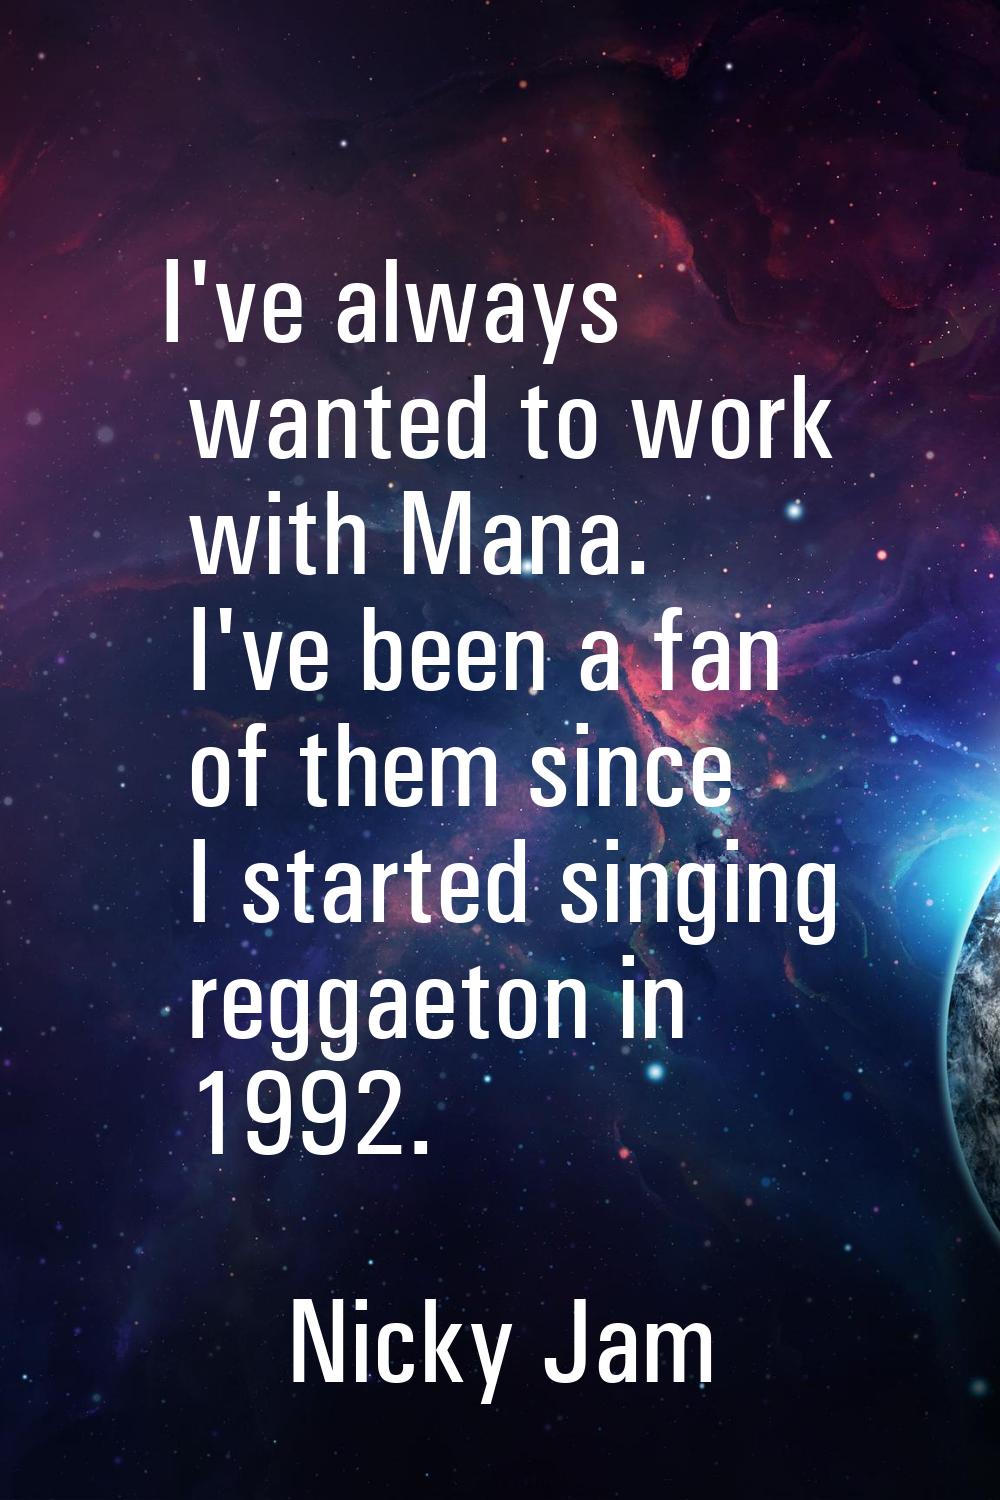 I've always wanted to work with Mana. I've been a fan of them since I started singing reggaeton in 